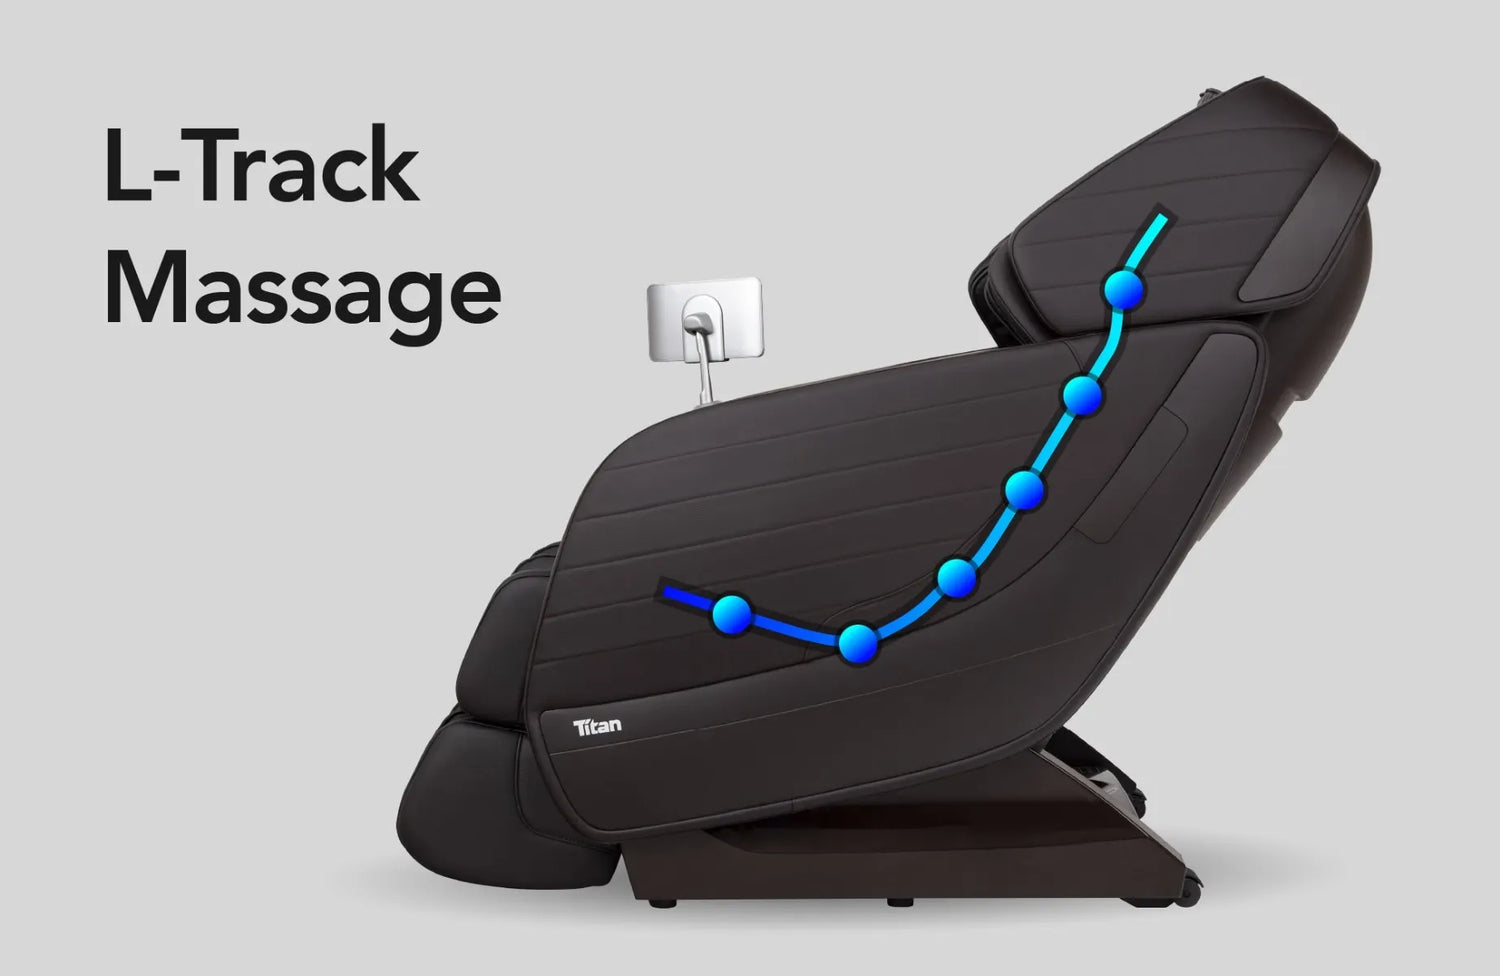 The Titan Jupiter Premium LE Massage Chair has an L-Track frame built to massage the back of your head down to your glutes. 